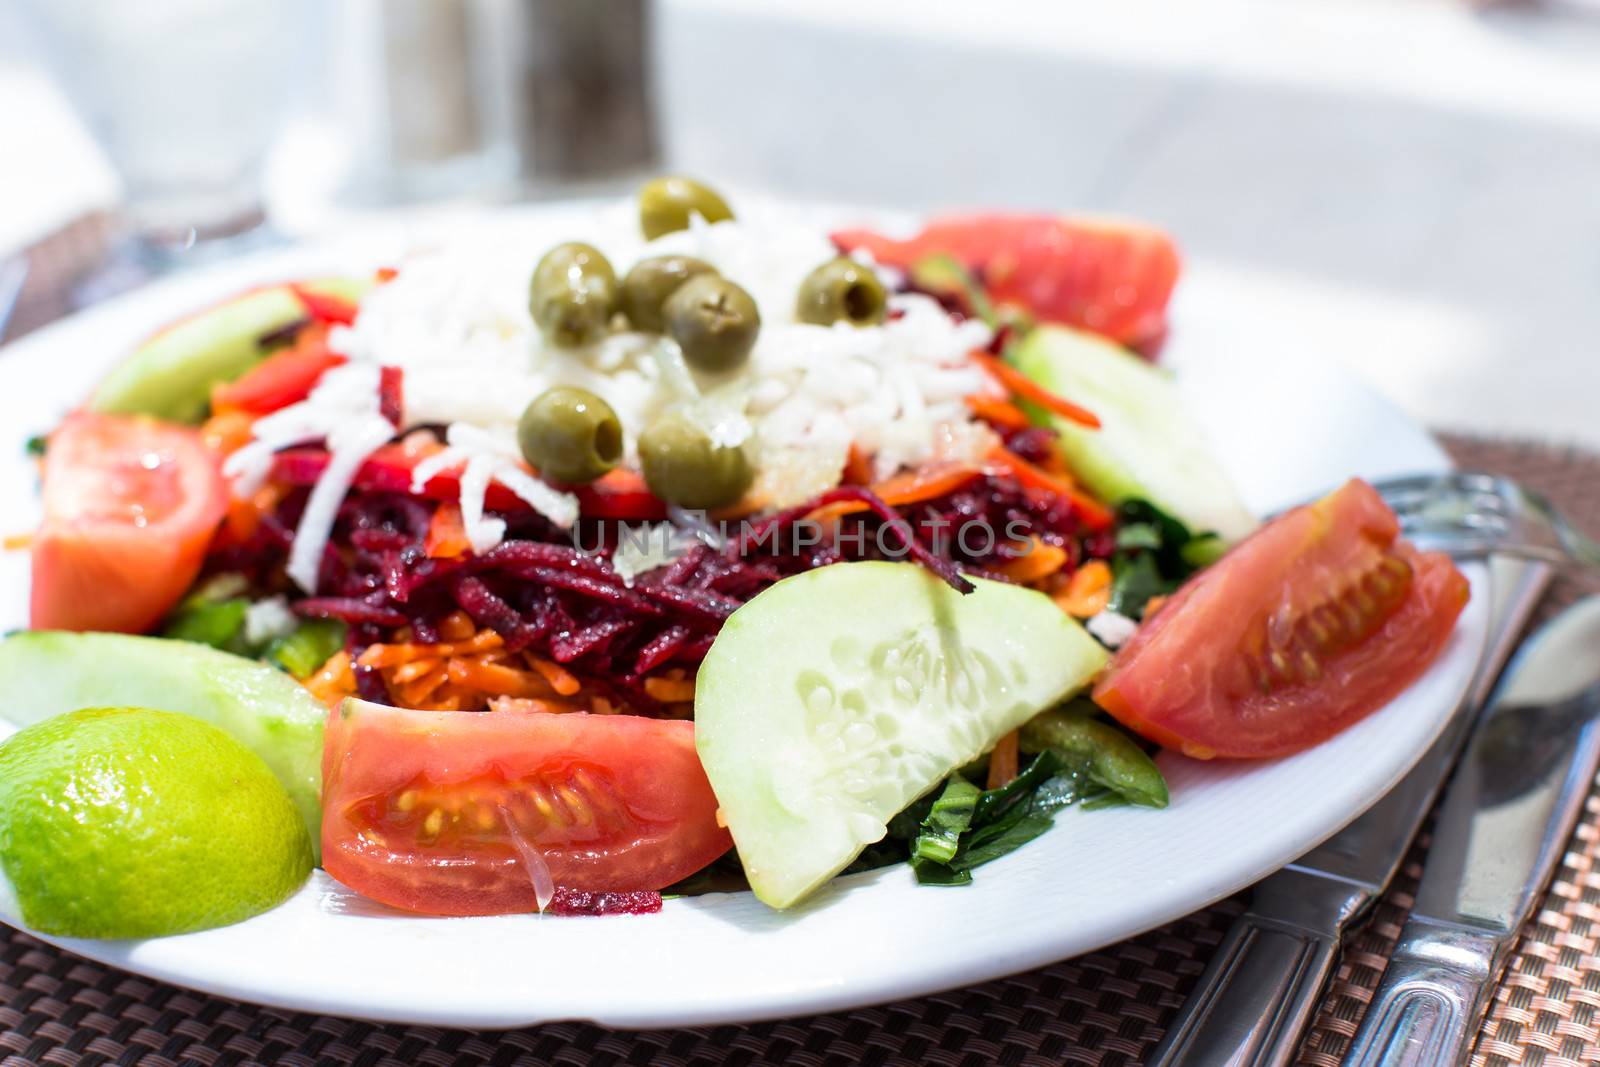 Closeup view of a plate of fresh mixed salads and vegetables with tomato, cucumber and lemon in the foreground